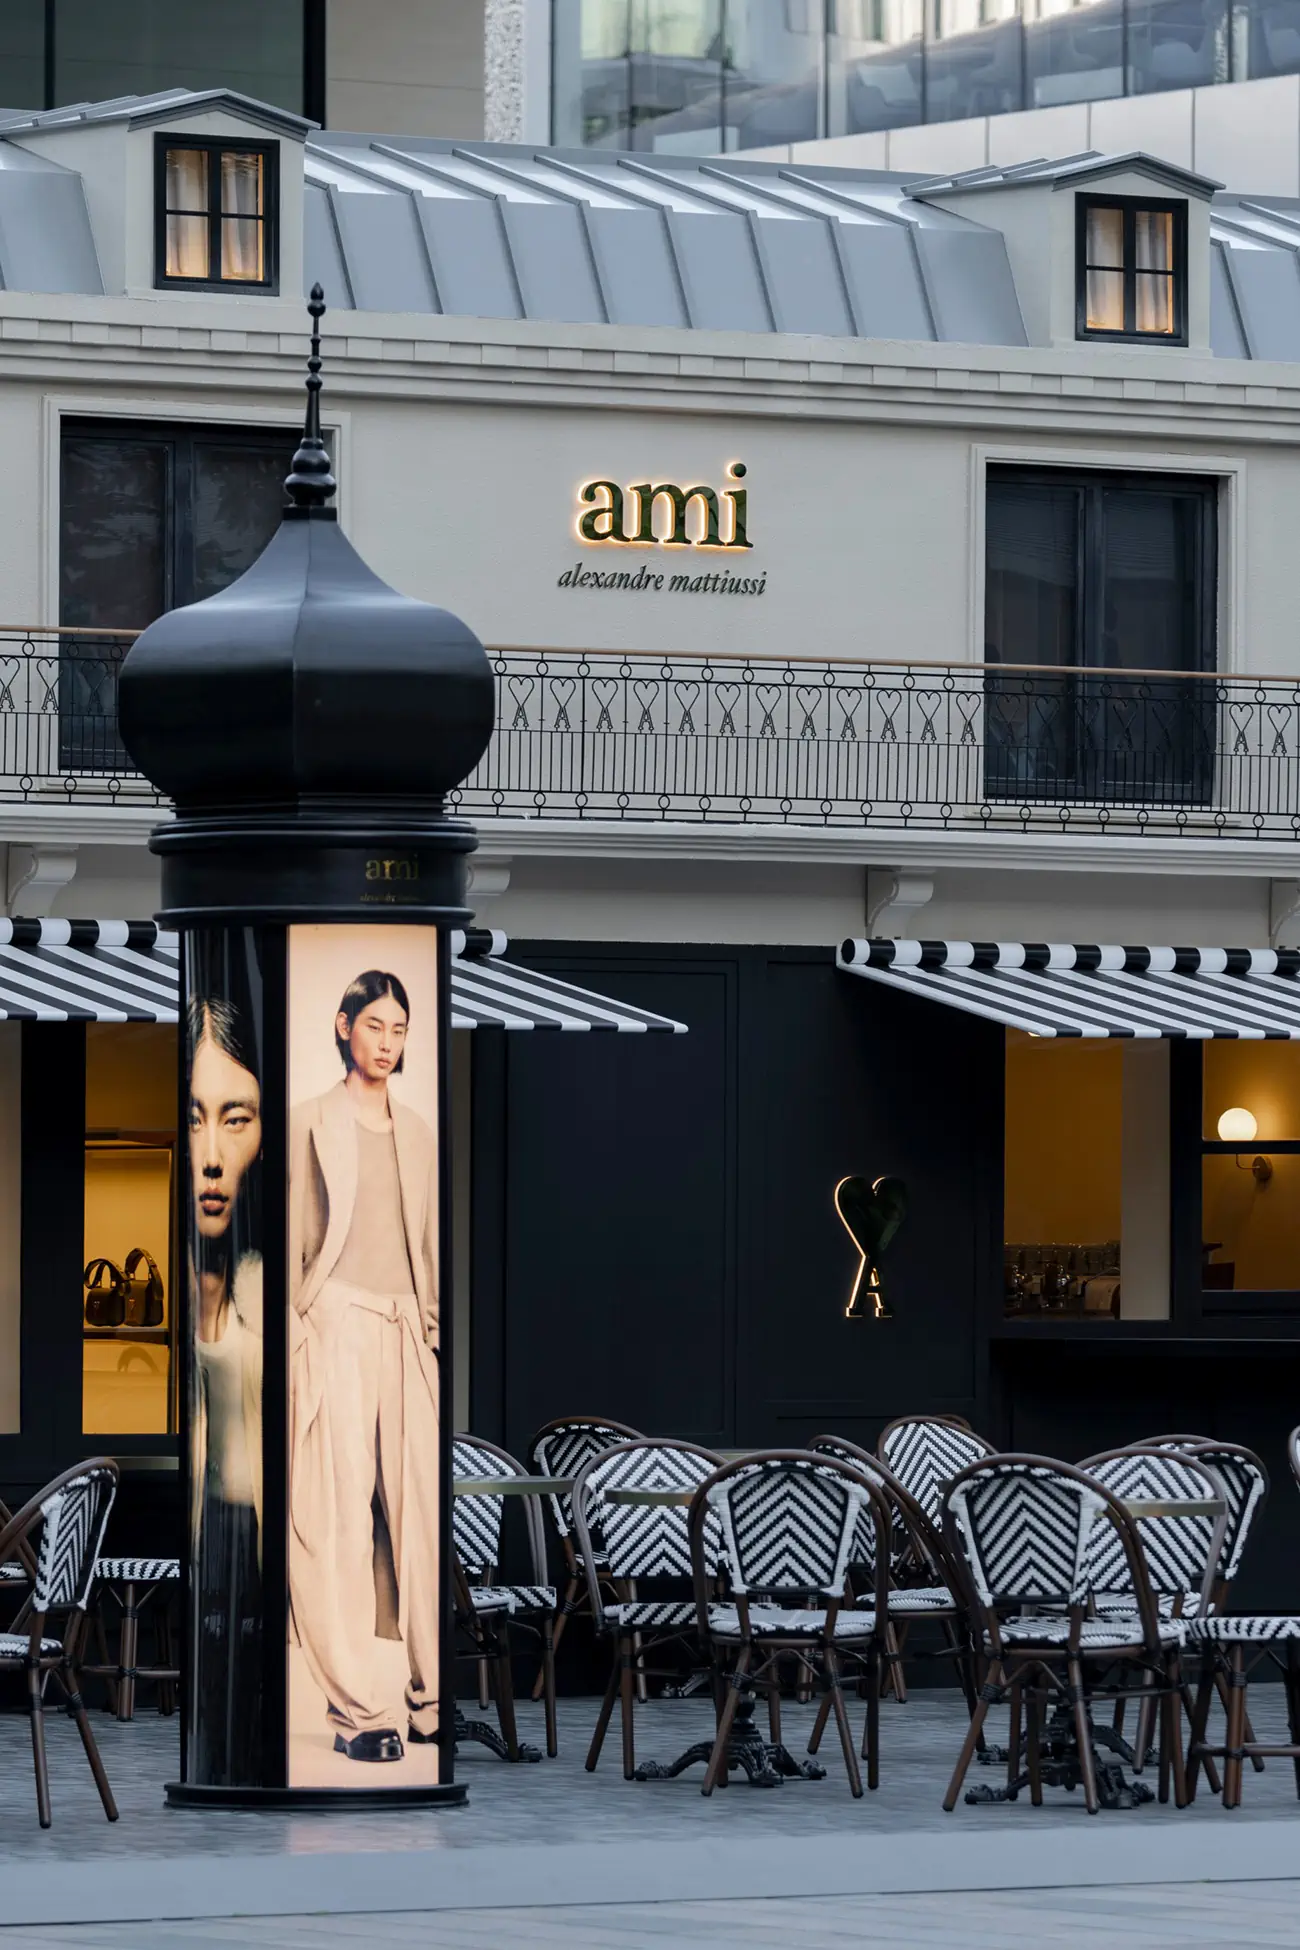 AMI Alexandre Mattiussi's pop-up cafés are sweeping through three cities in China